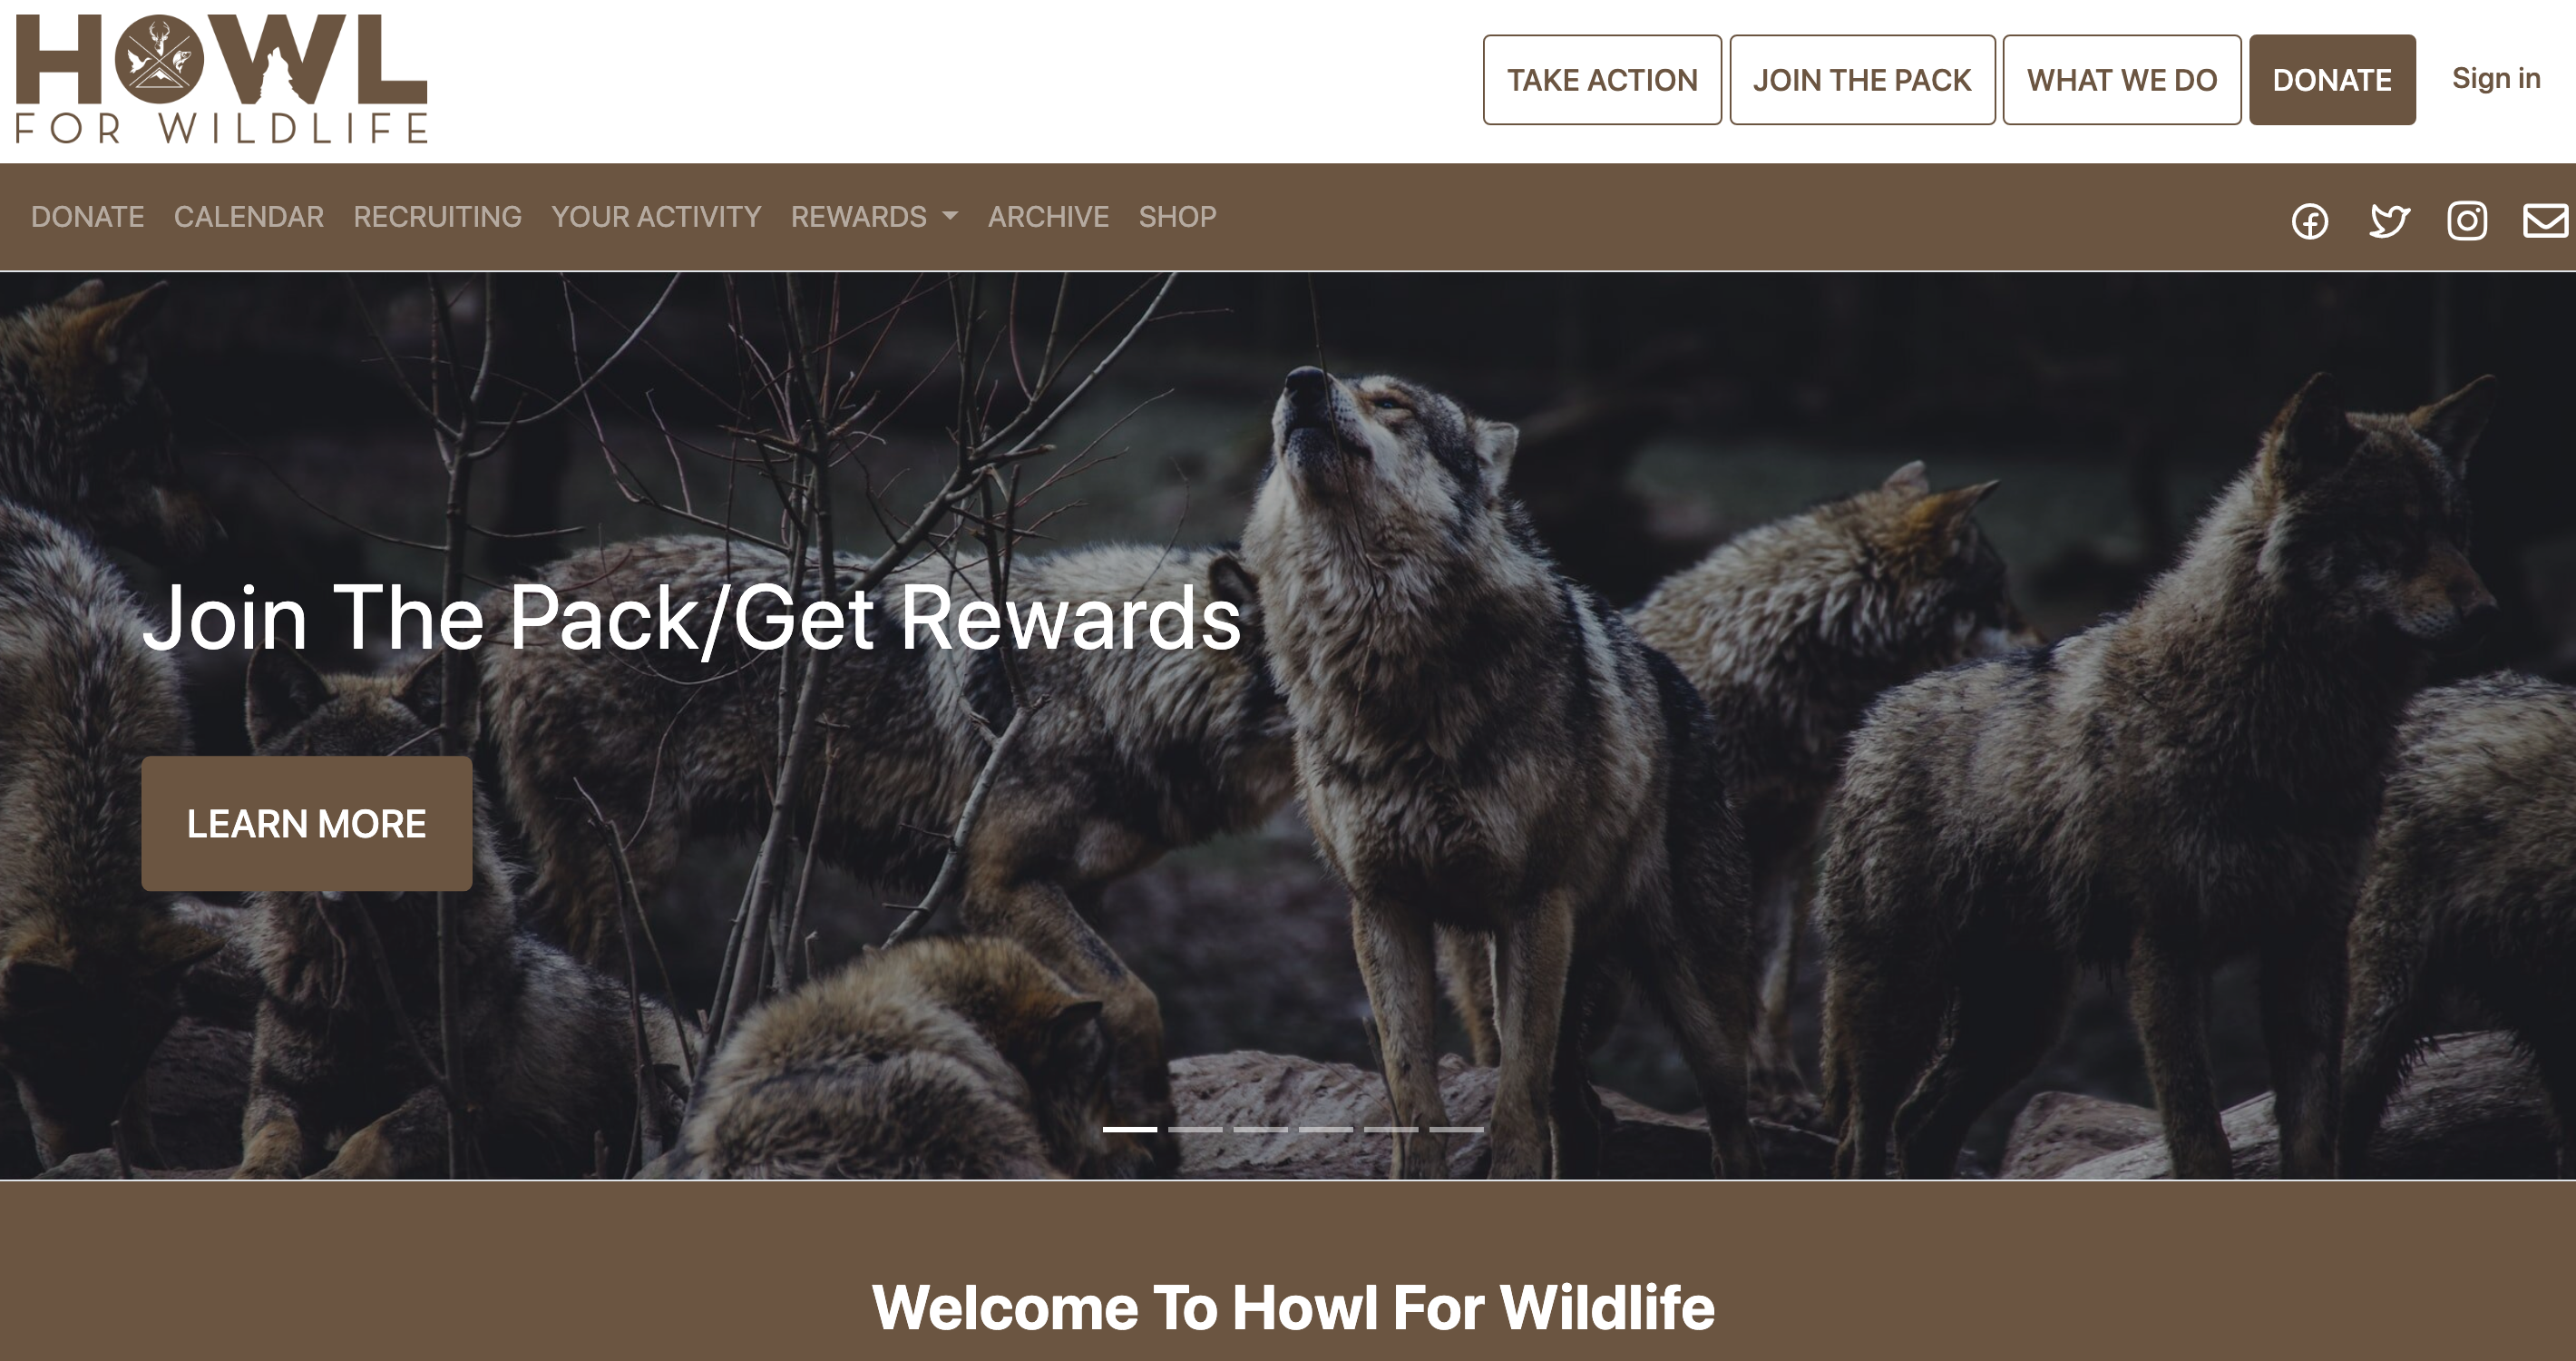 HOWL for Wildlife wants hunters to make their voices heard